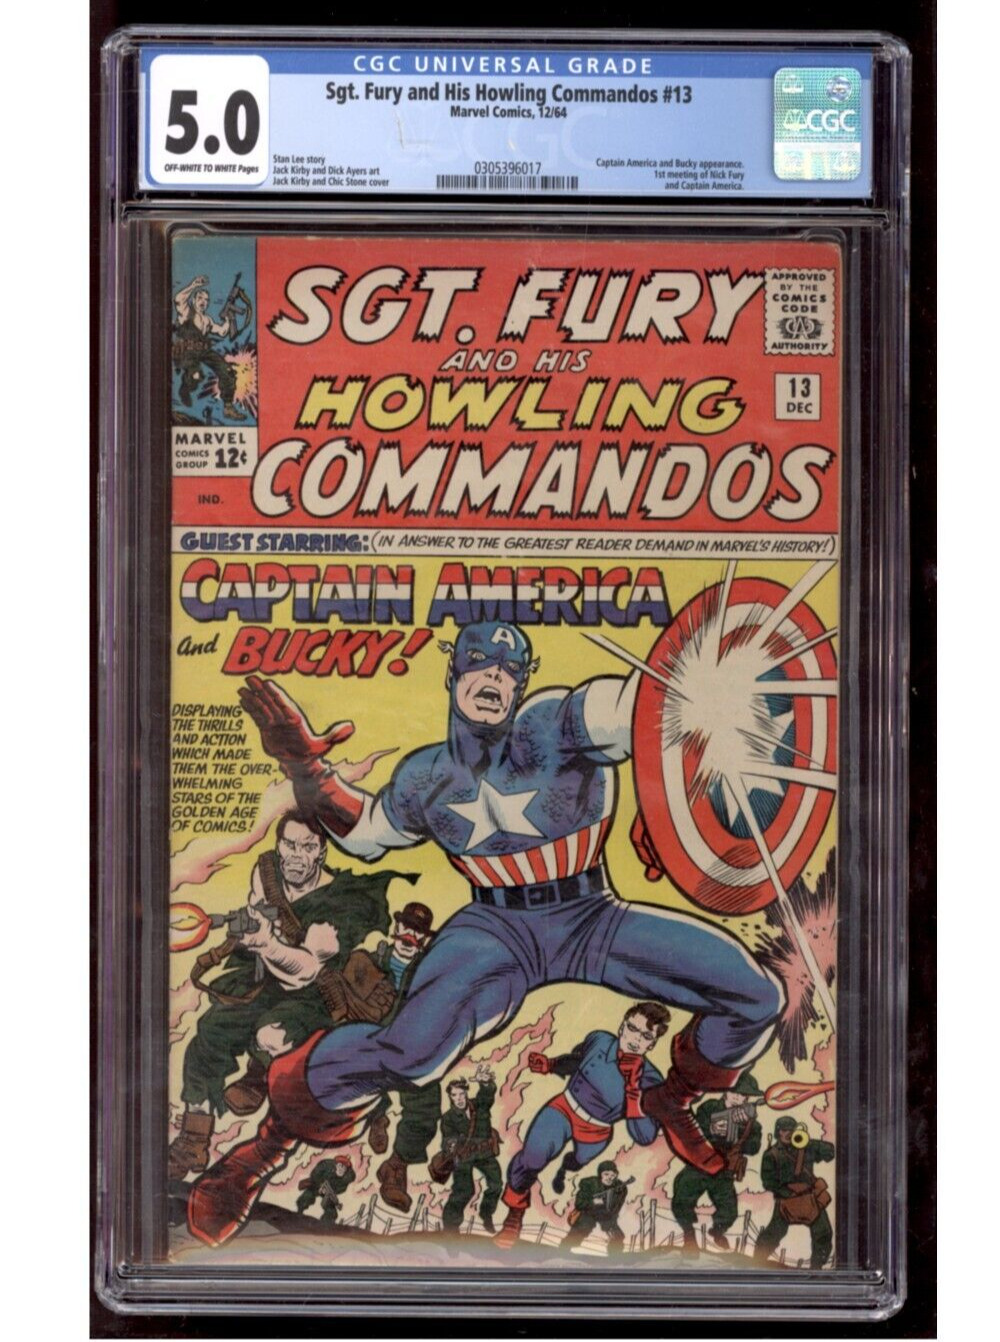 Sgt Fury and His Howling Commandos 13 CGC 5.0 Kirby Cover 1964